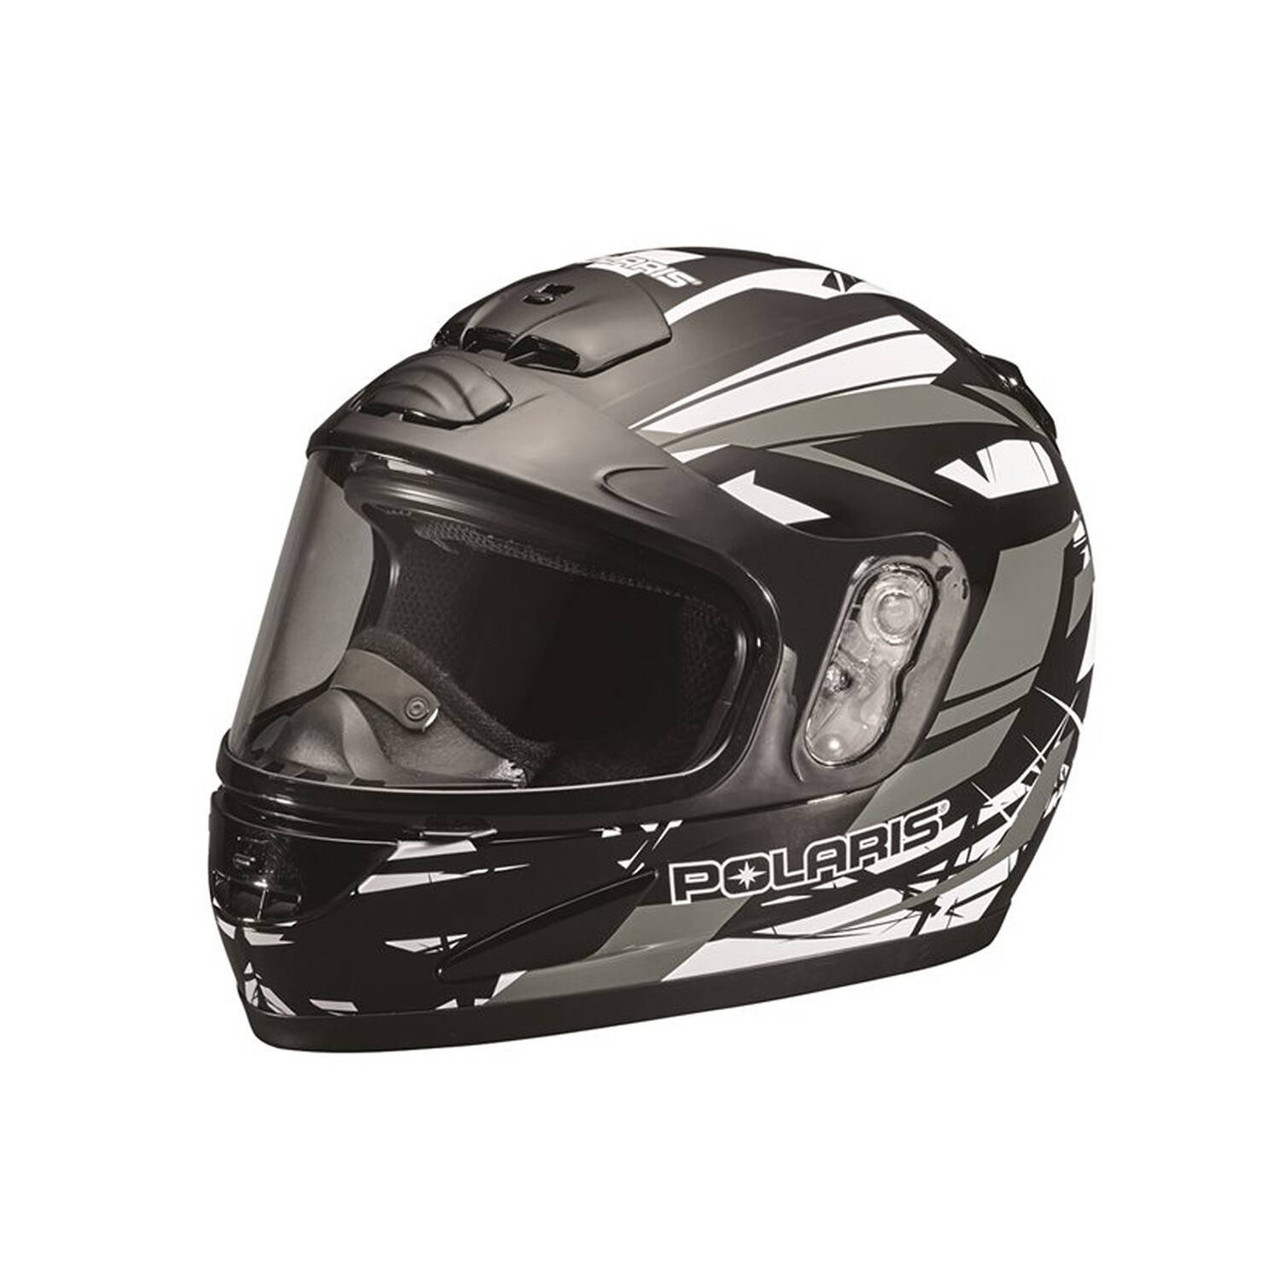 Polaris New OEM Youth Small Helmet with Built-In Breath Deflector,286774702